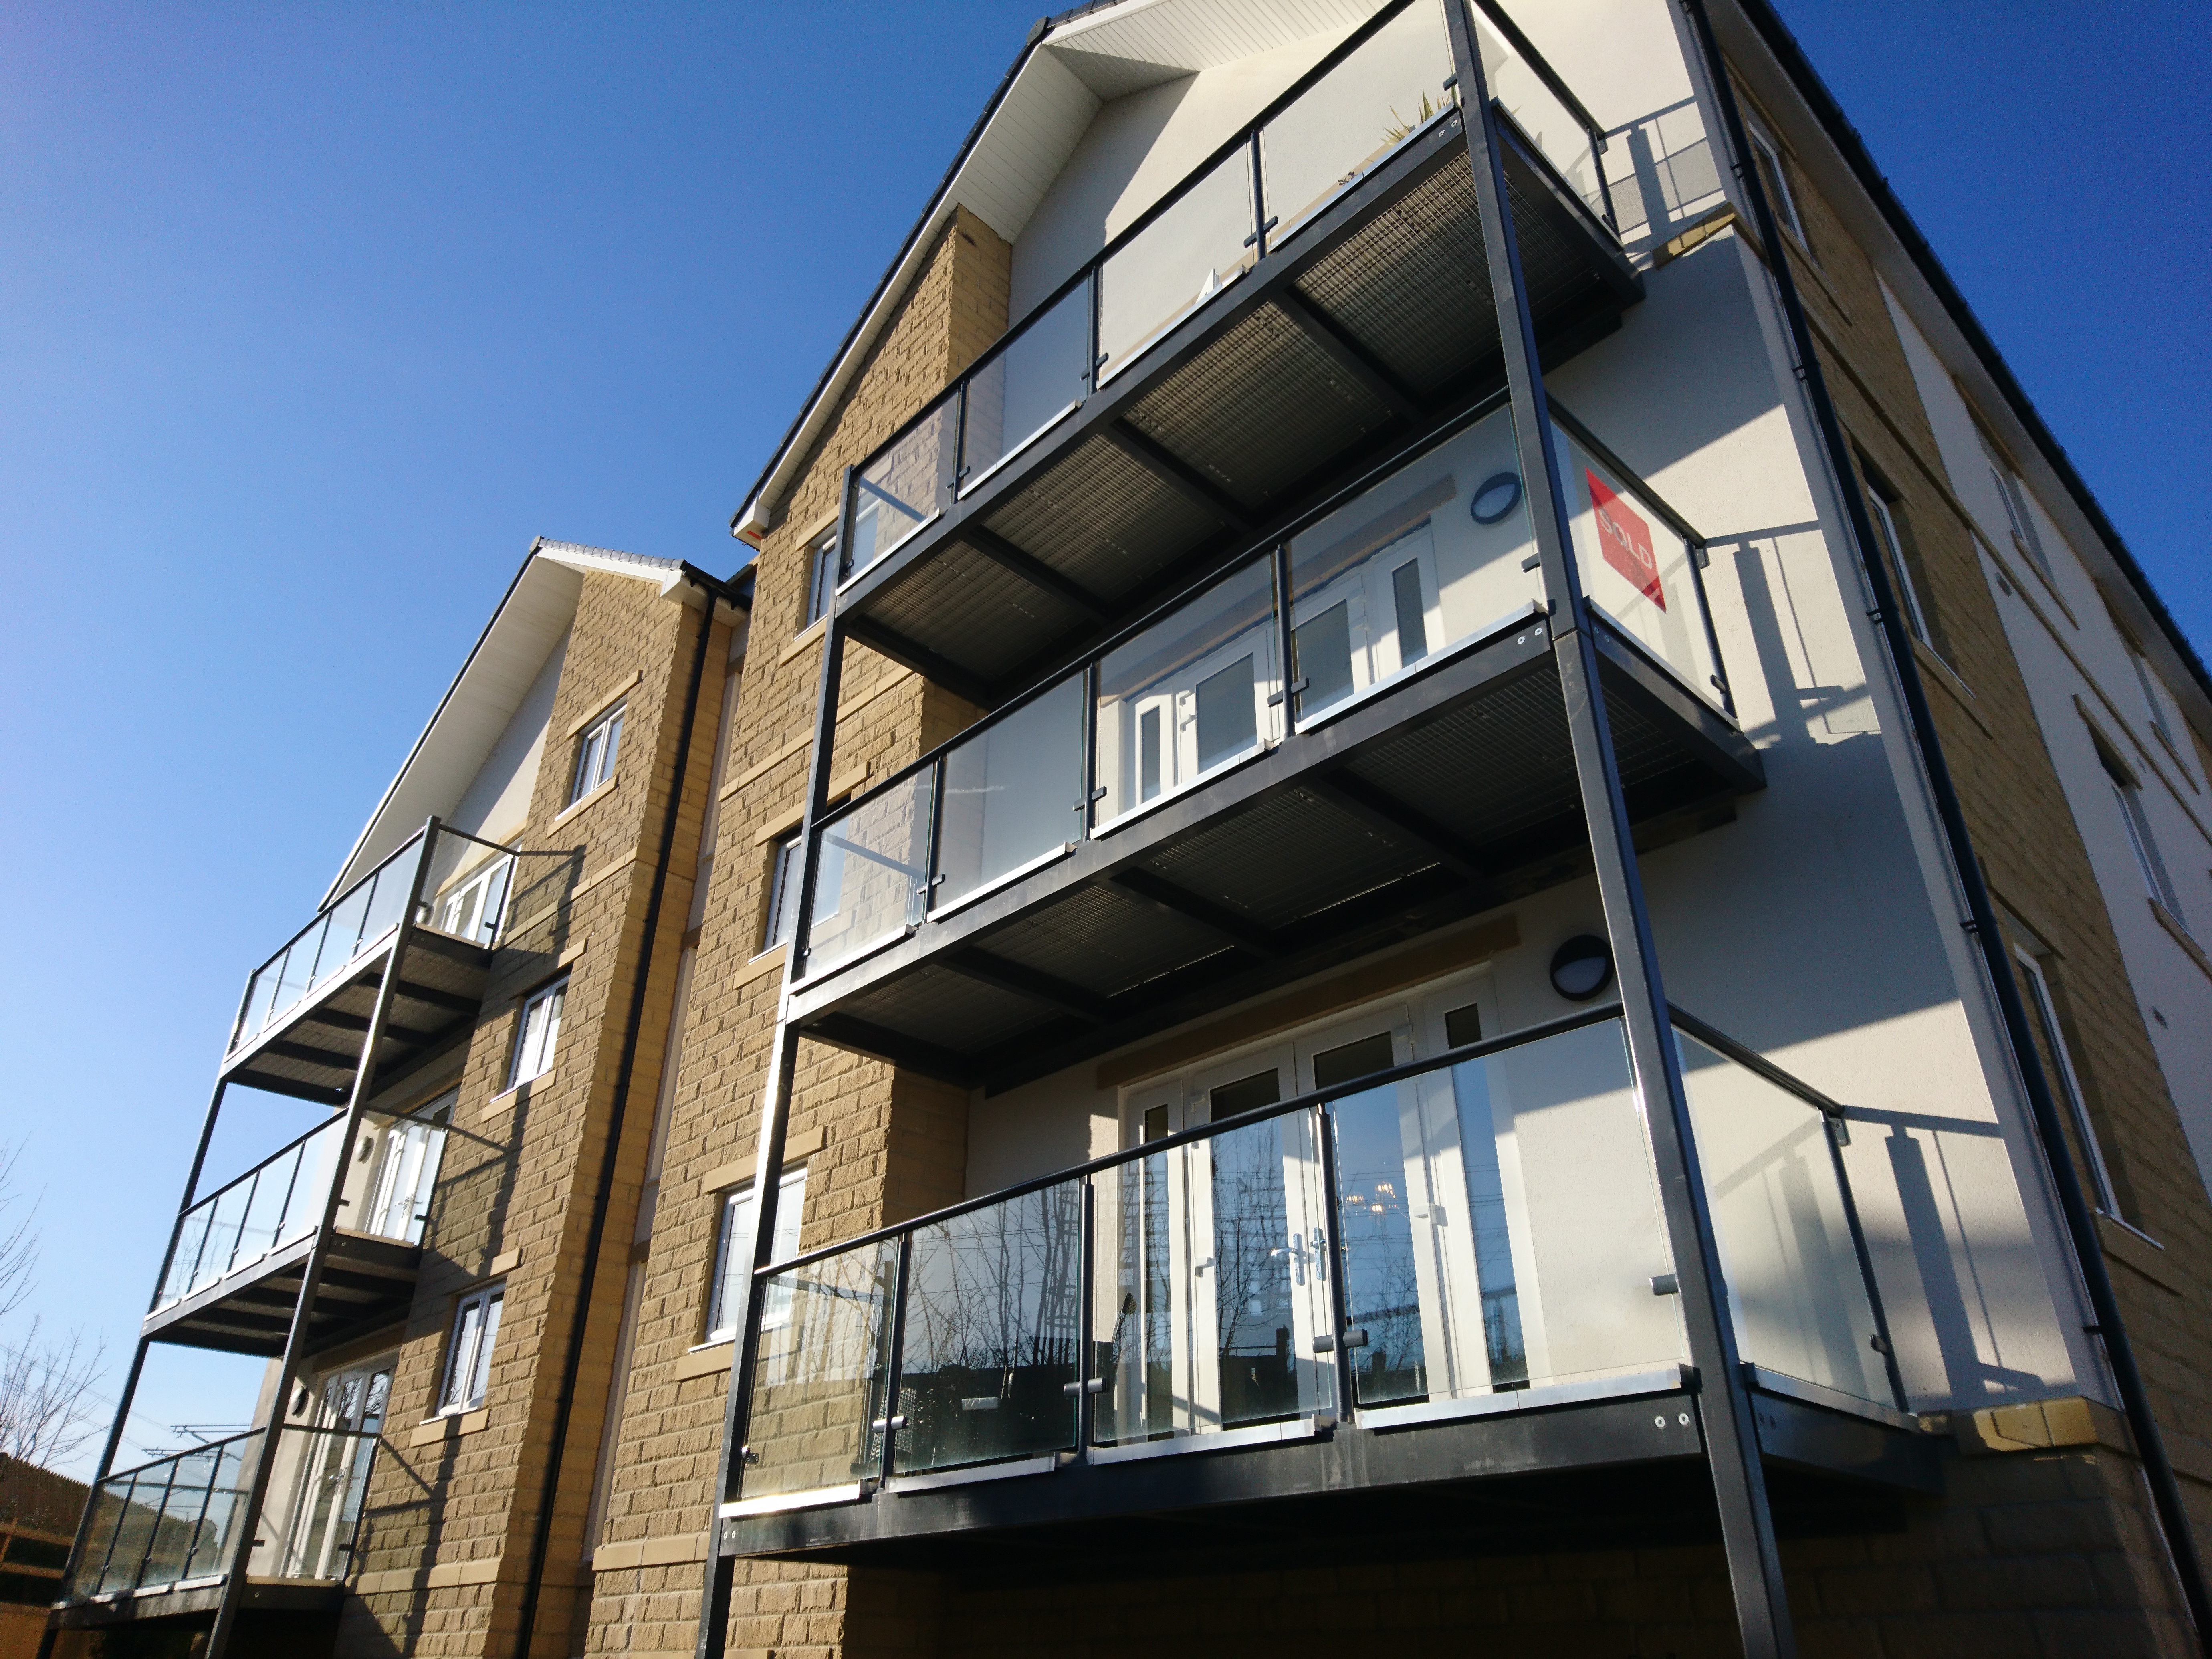 Neaco balconies are ready-made for modern standards